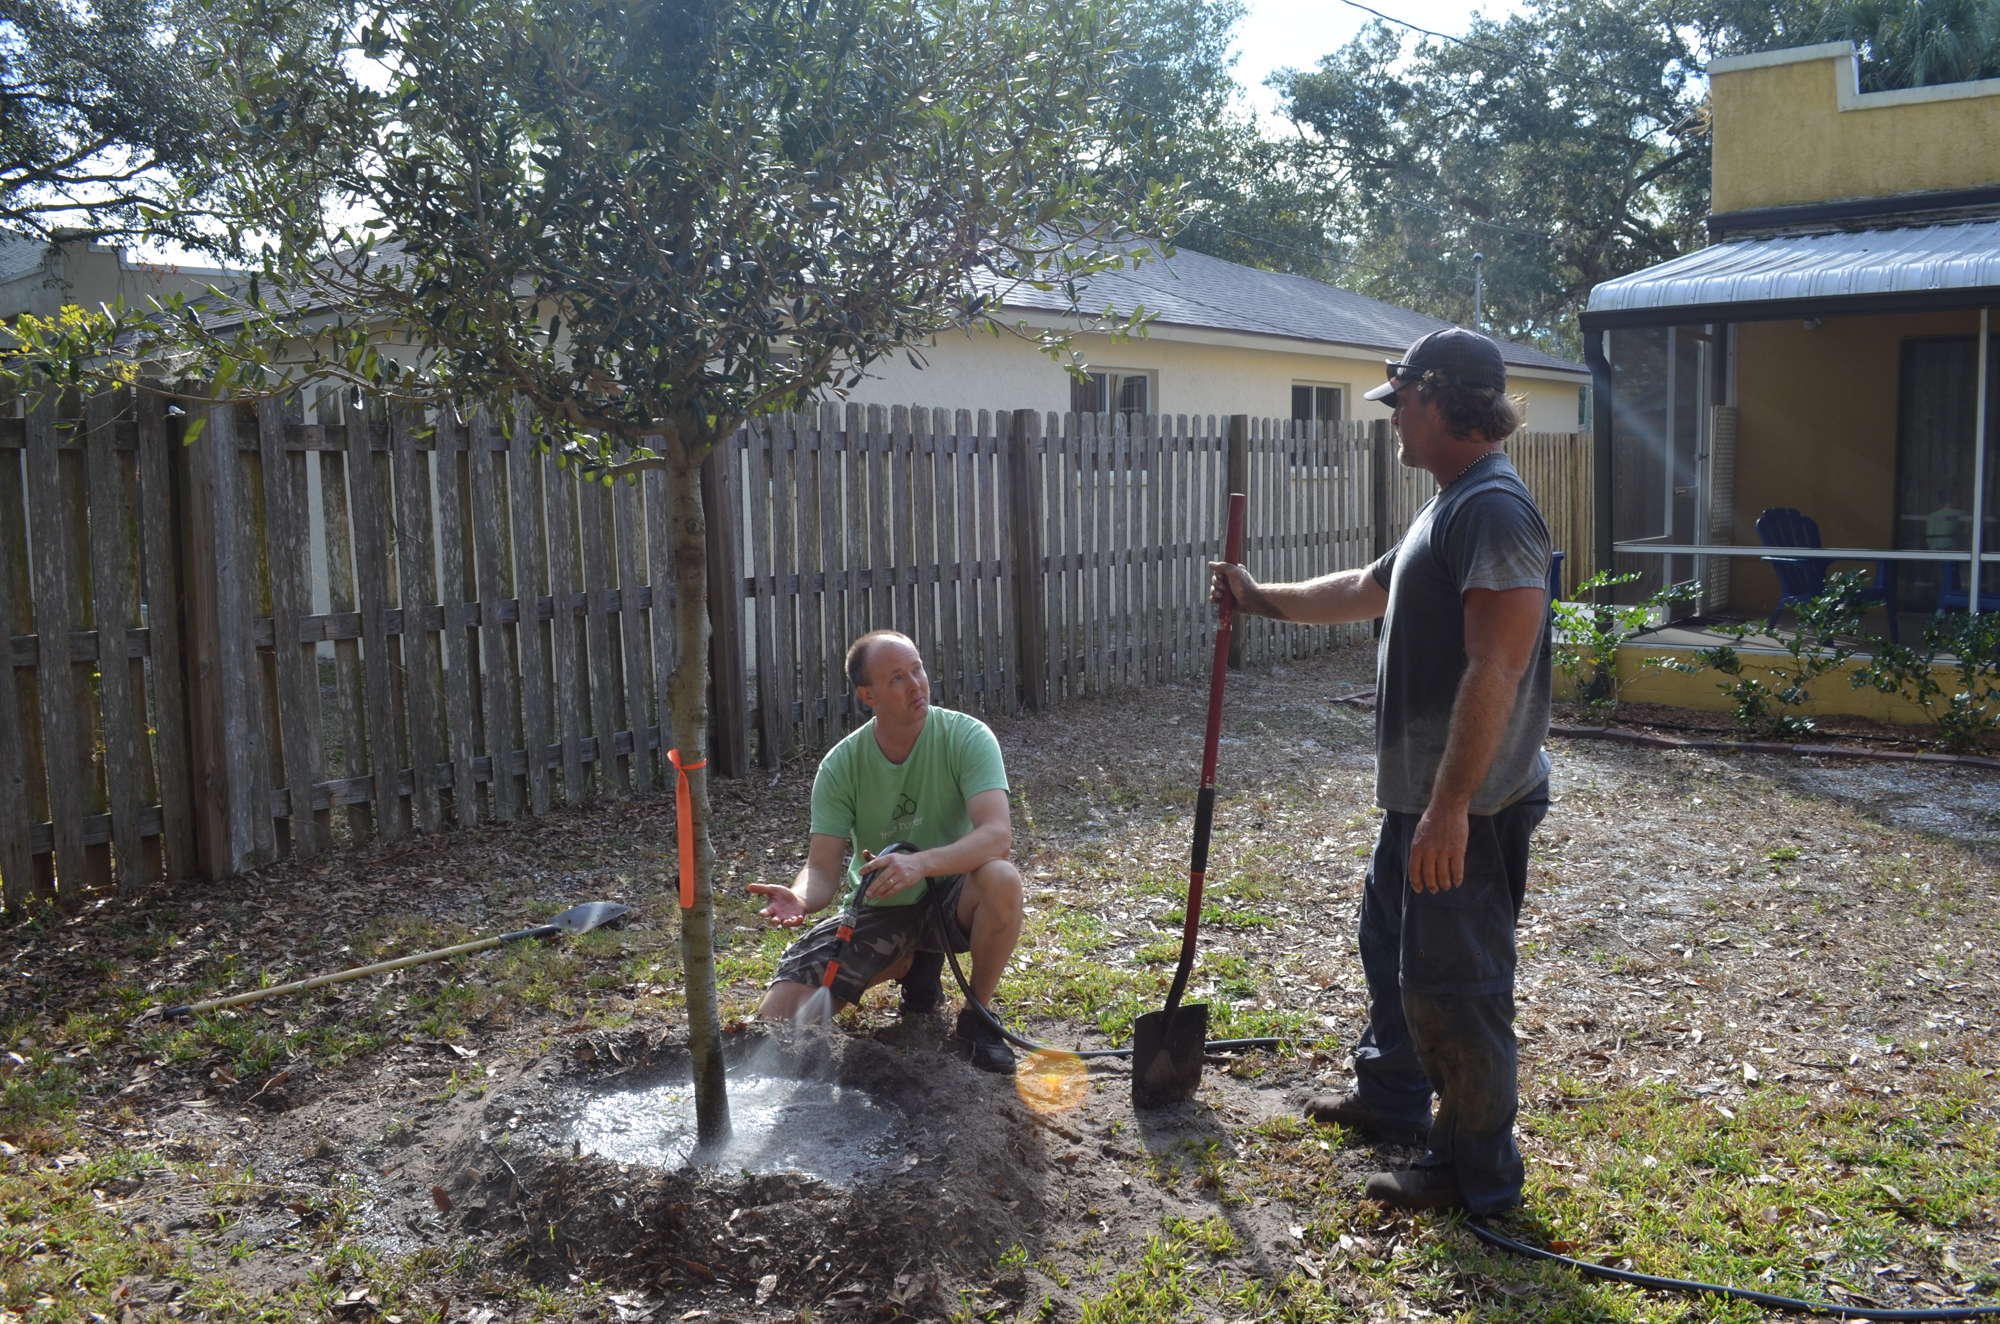 Arlington Park resident Nathan Wilson volunteered to help plant a tree on a neighboring property to mitigate the impacts of development.